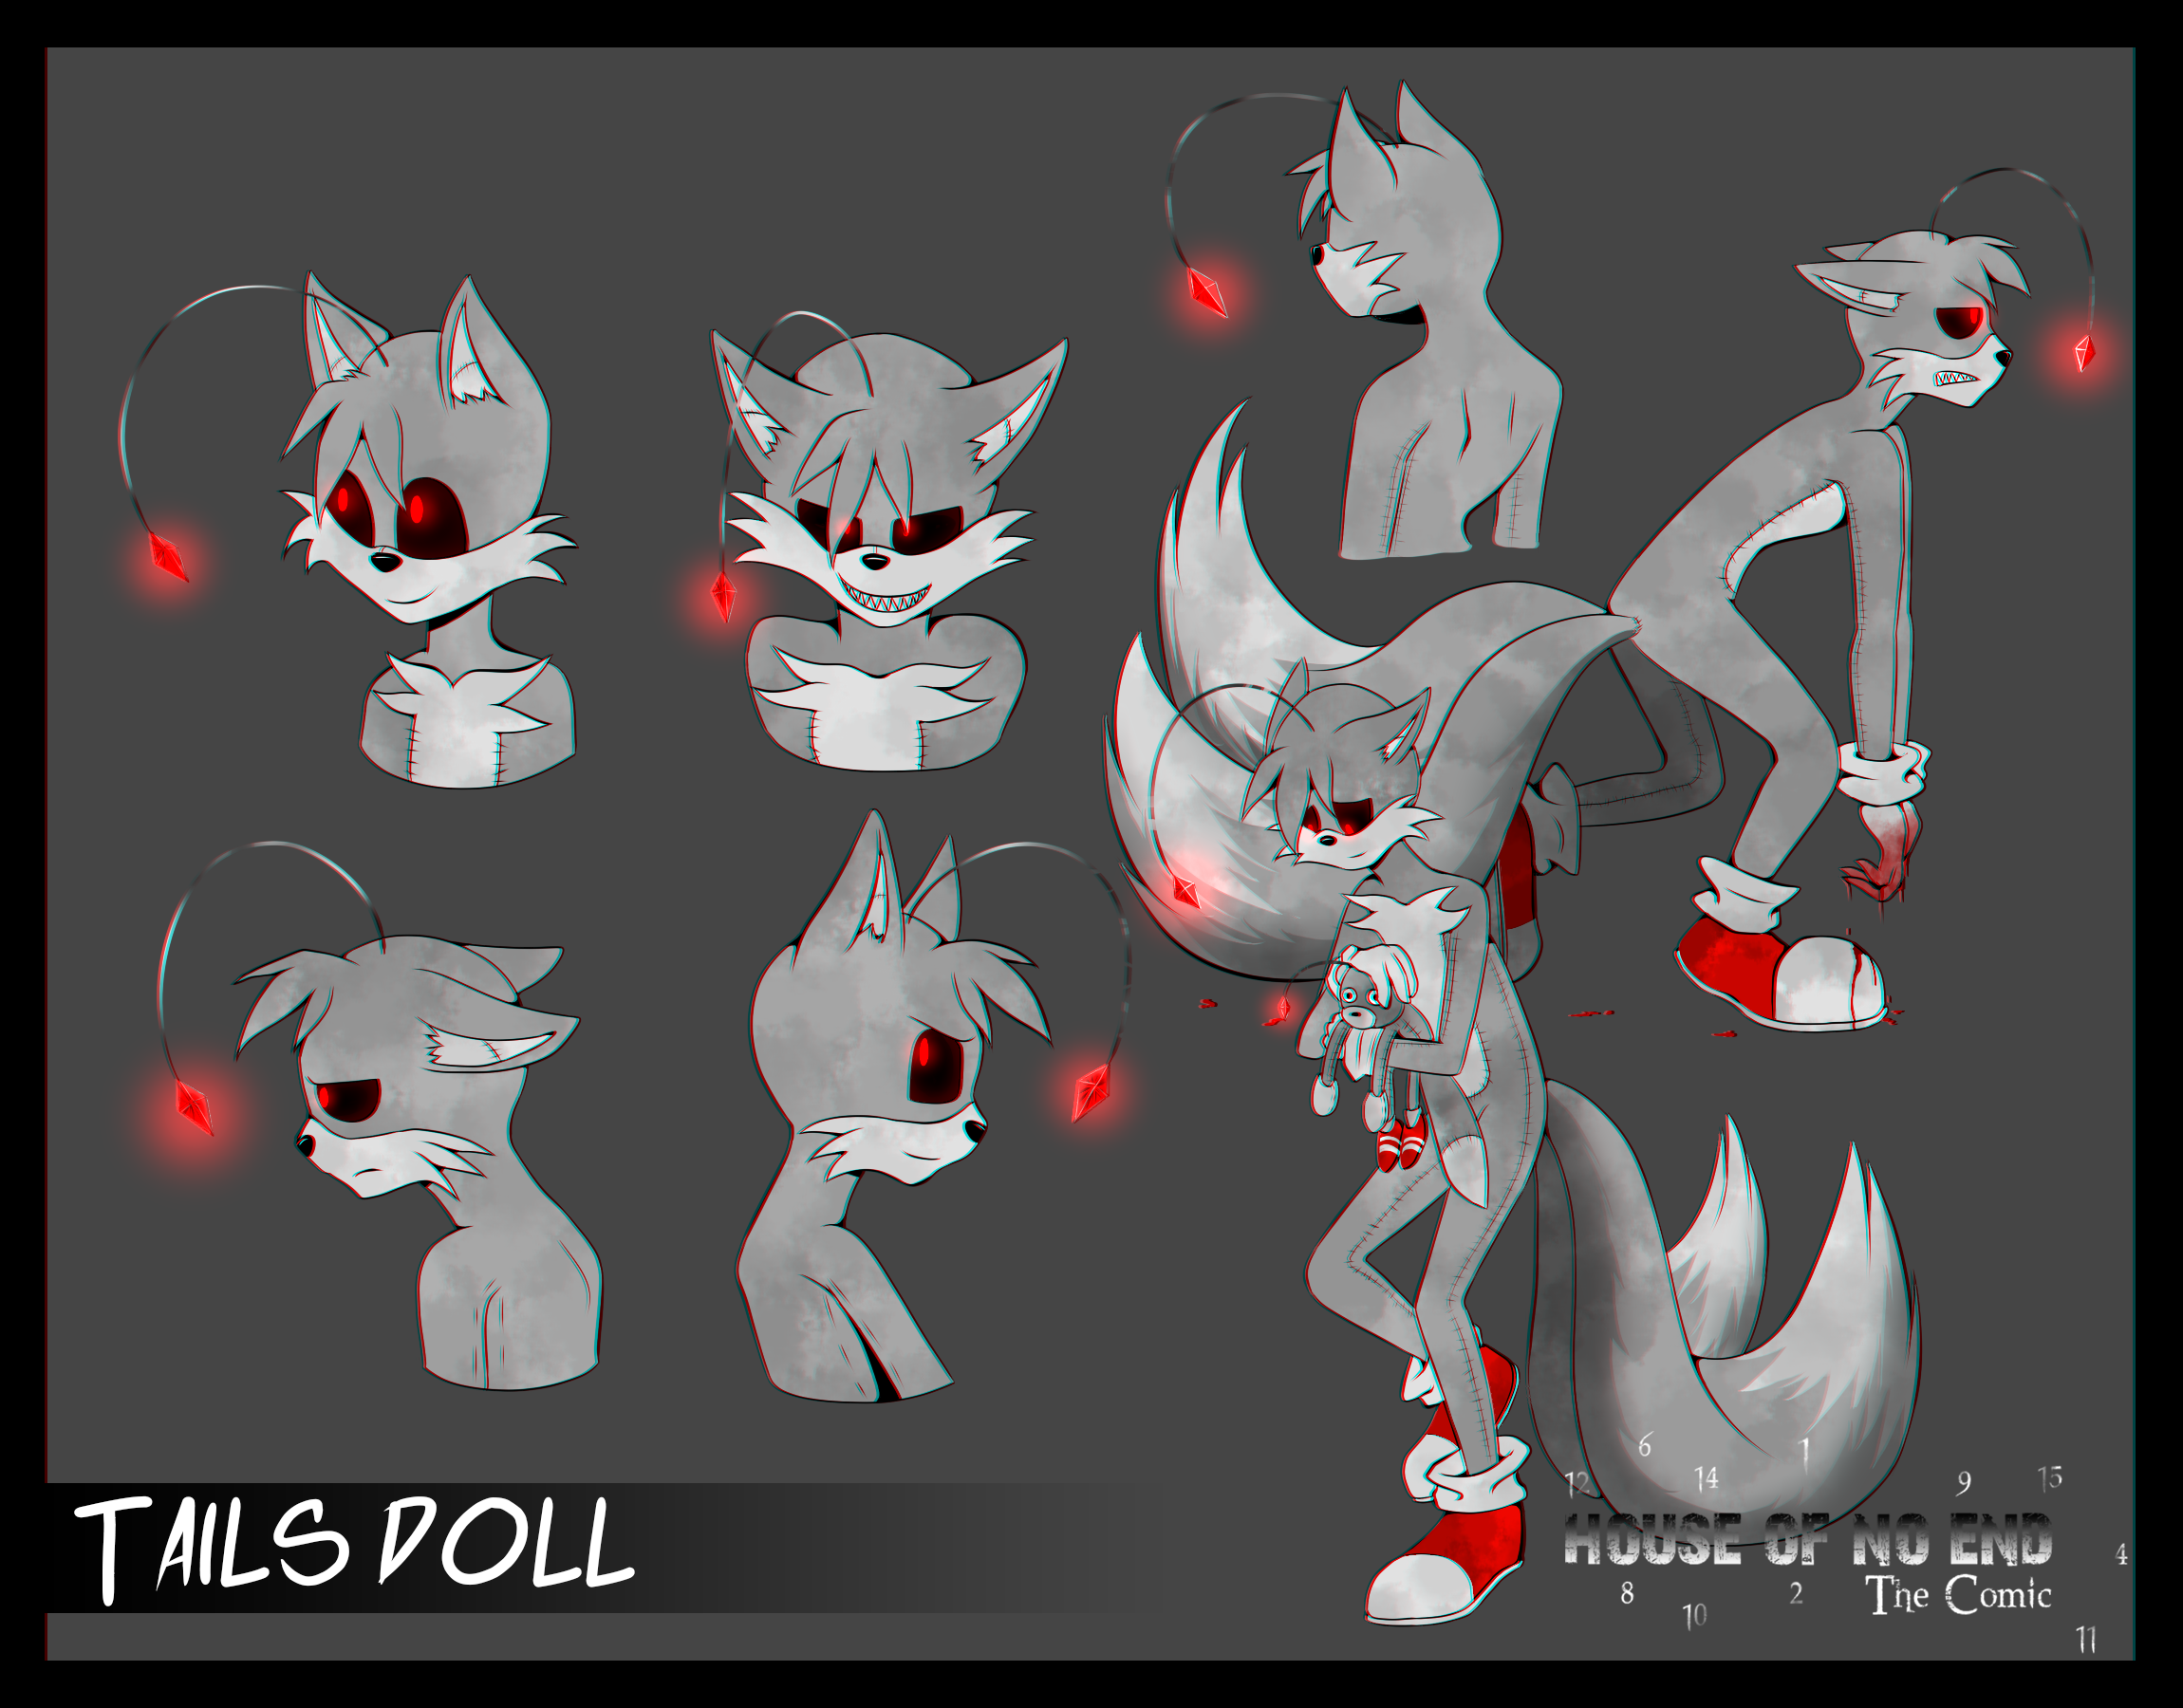 Colors Live - Tails Doll curse by Narukona13